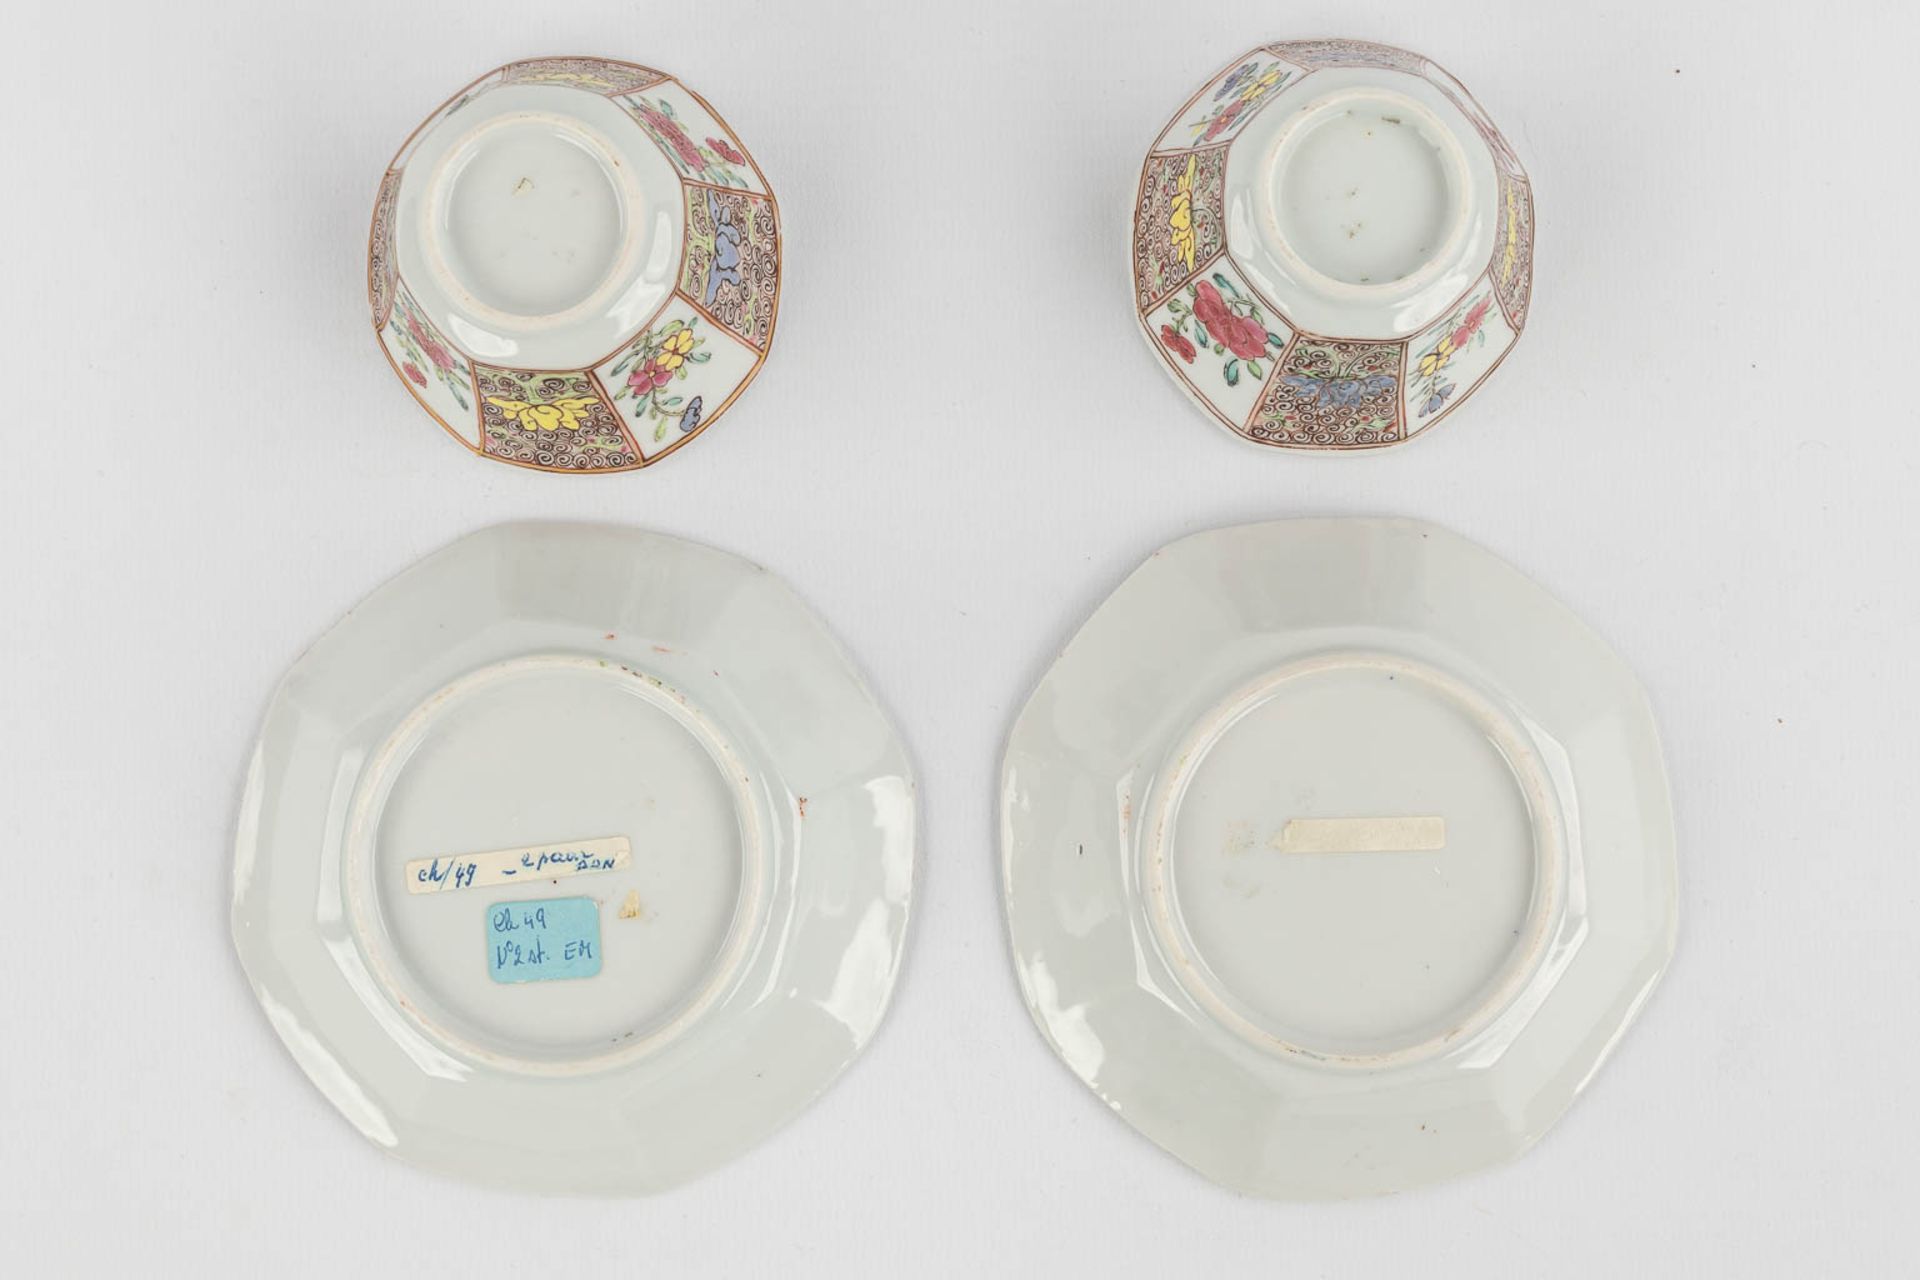 A collection of Chinese and Japanese porcelain, Imari, Blue-white, Famille Rose. 19th/20th C. (D:21 - Image 13 of 19